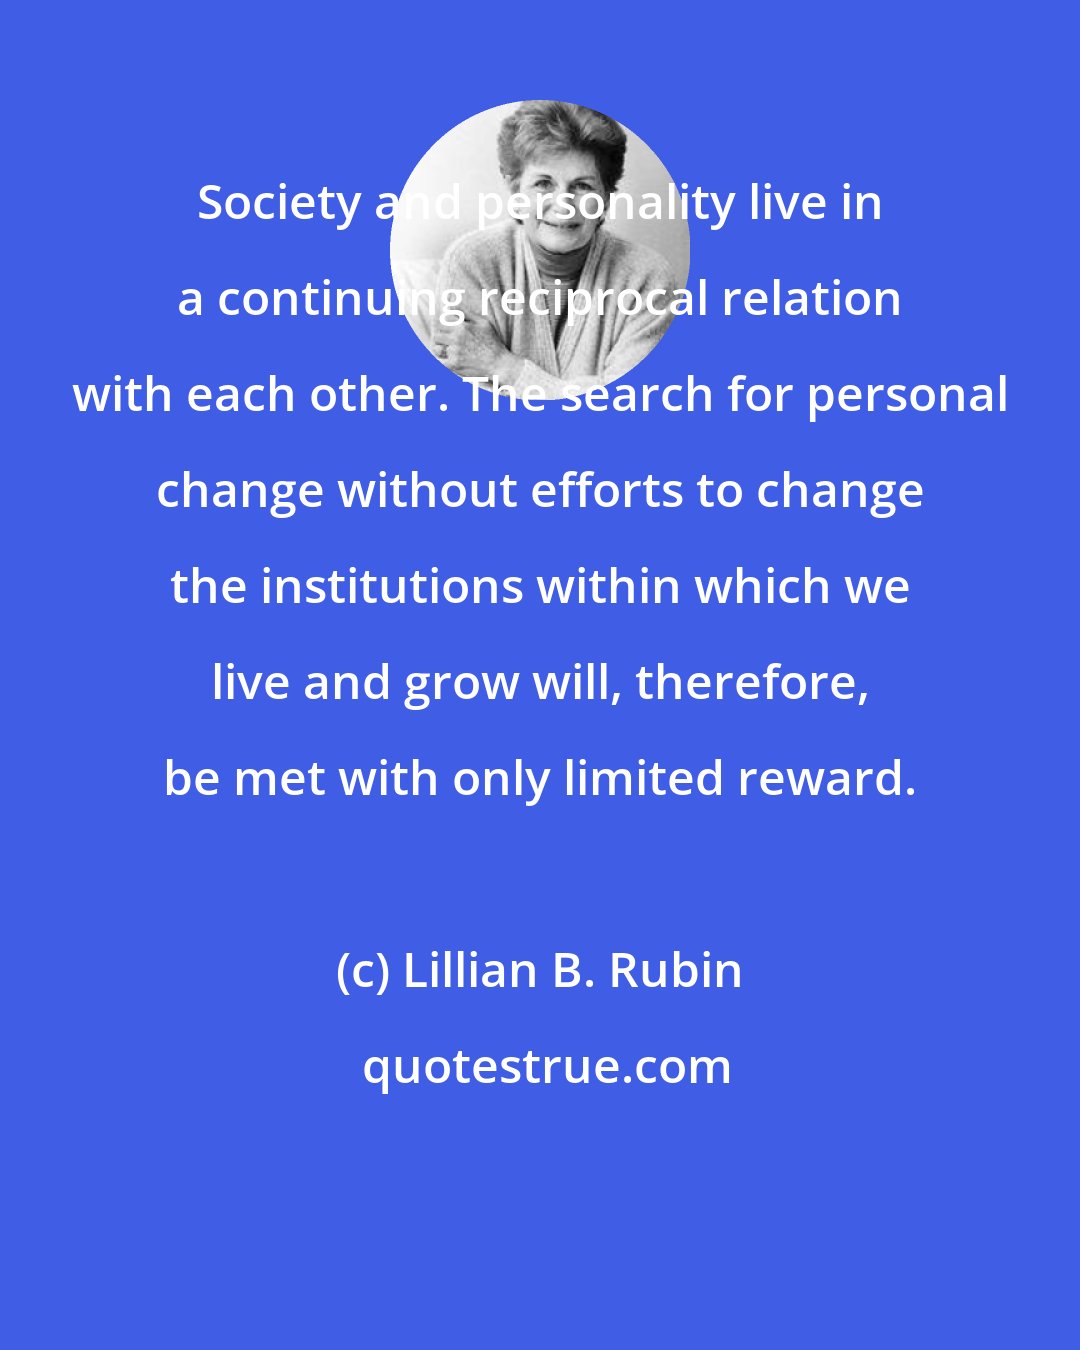 Lillian B. Rubin: Society and personality live in a continuing reciprocal relation with each other. The search for personal change without efforts to change the institutions within which we live and grow will, therefore, be met with only limited reward.